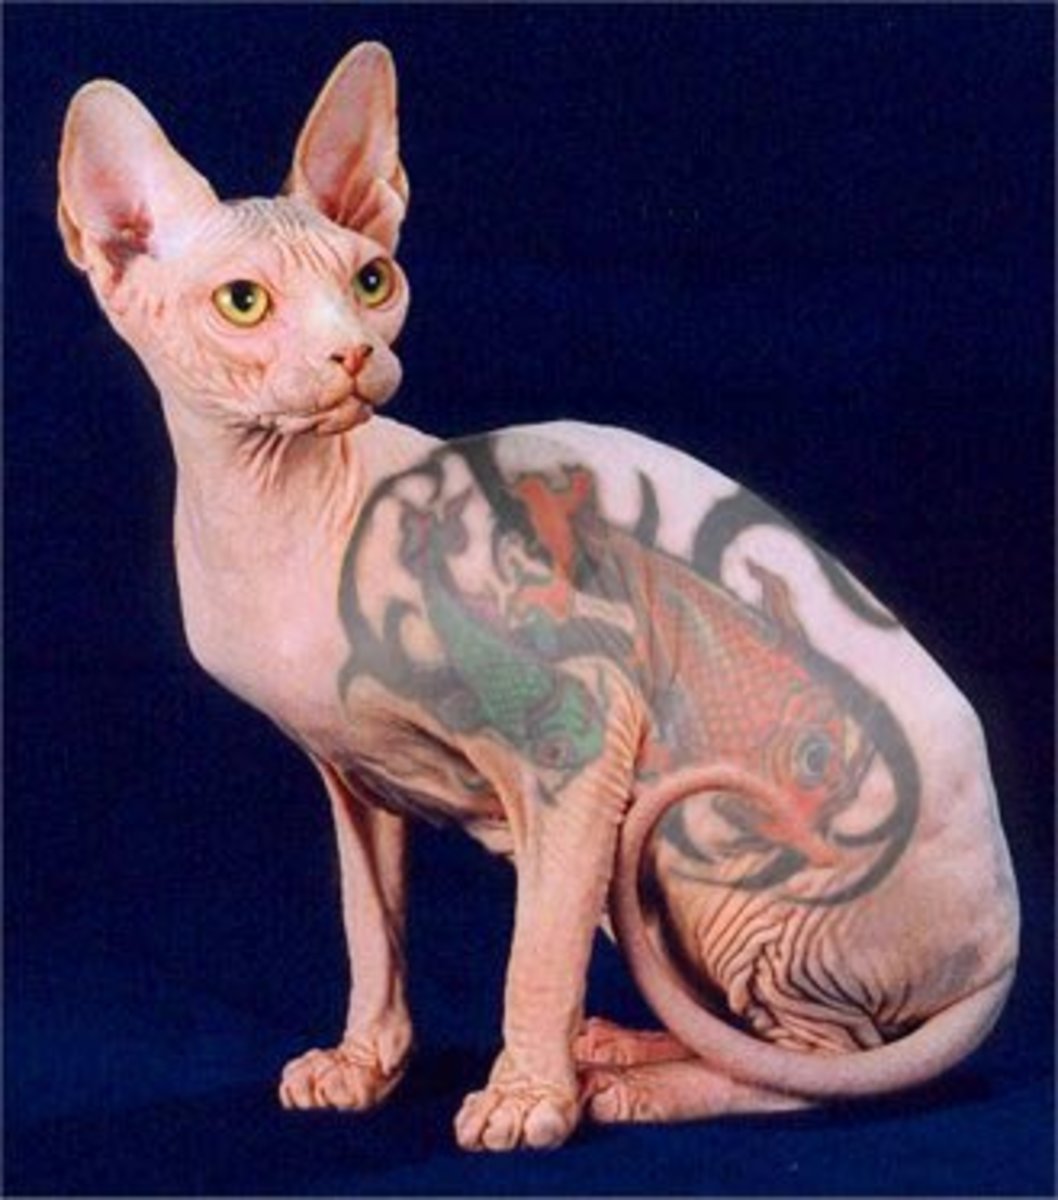 A tattooed Sphynx cat; this is cruel towards the animal.